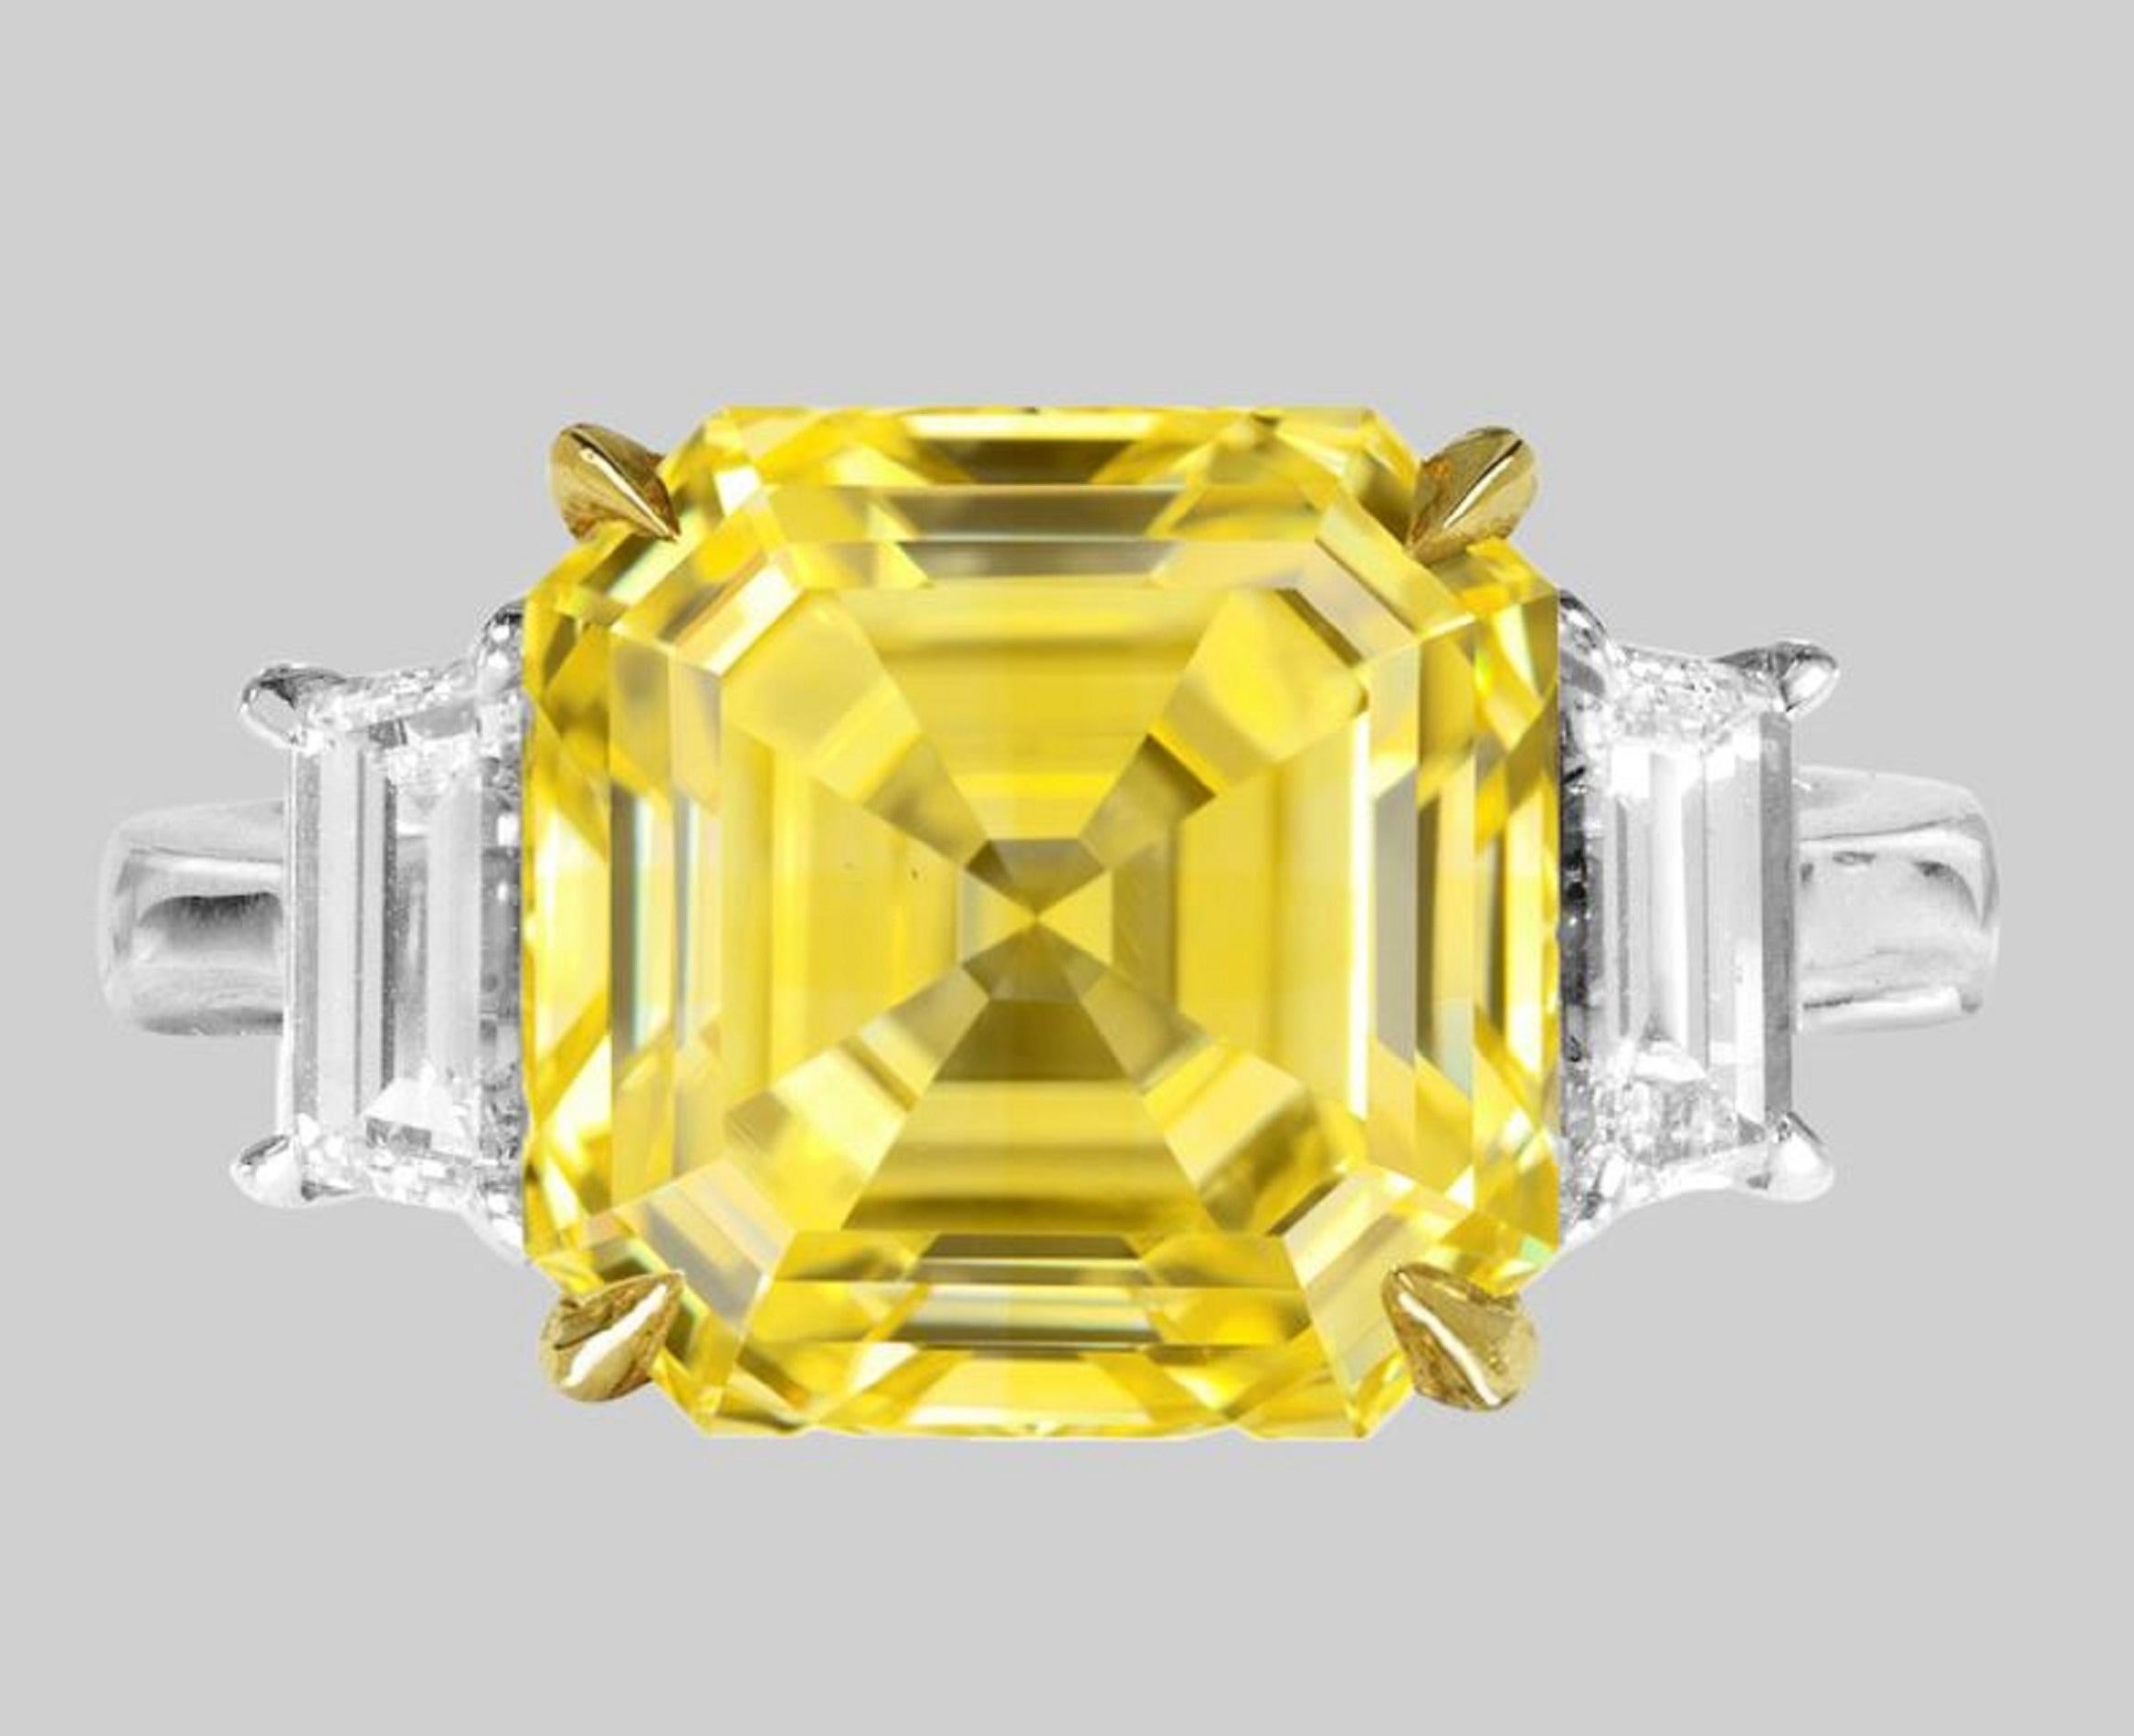 This exquisite ring is centered around a magnificent 3.50 ct Asscher-cut diamond, a true masterpiece of design and craftsmanship. The diamond, certified by the Gemological Institute of America (GIA), boasts a Fancy VIVID Yellow color, radiating a